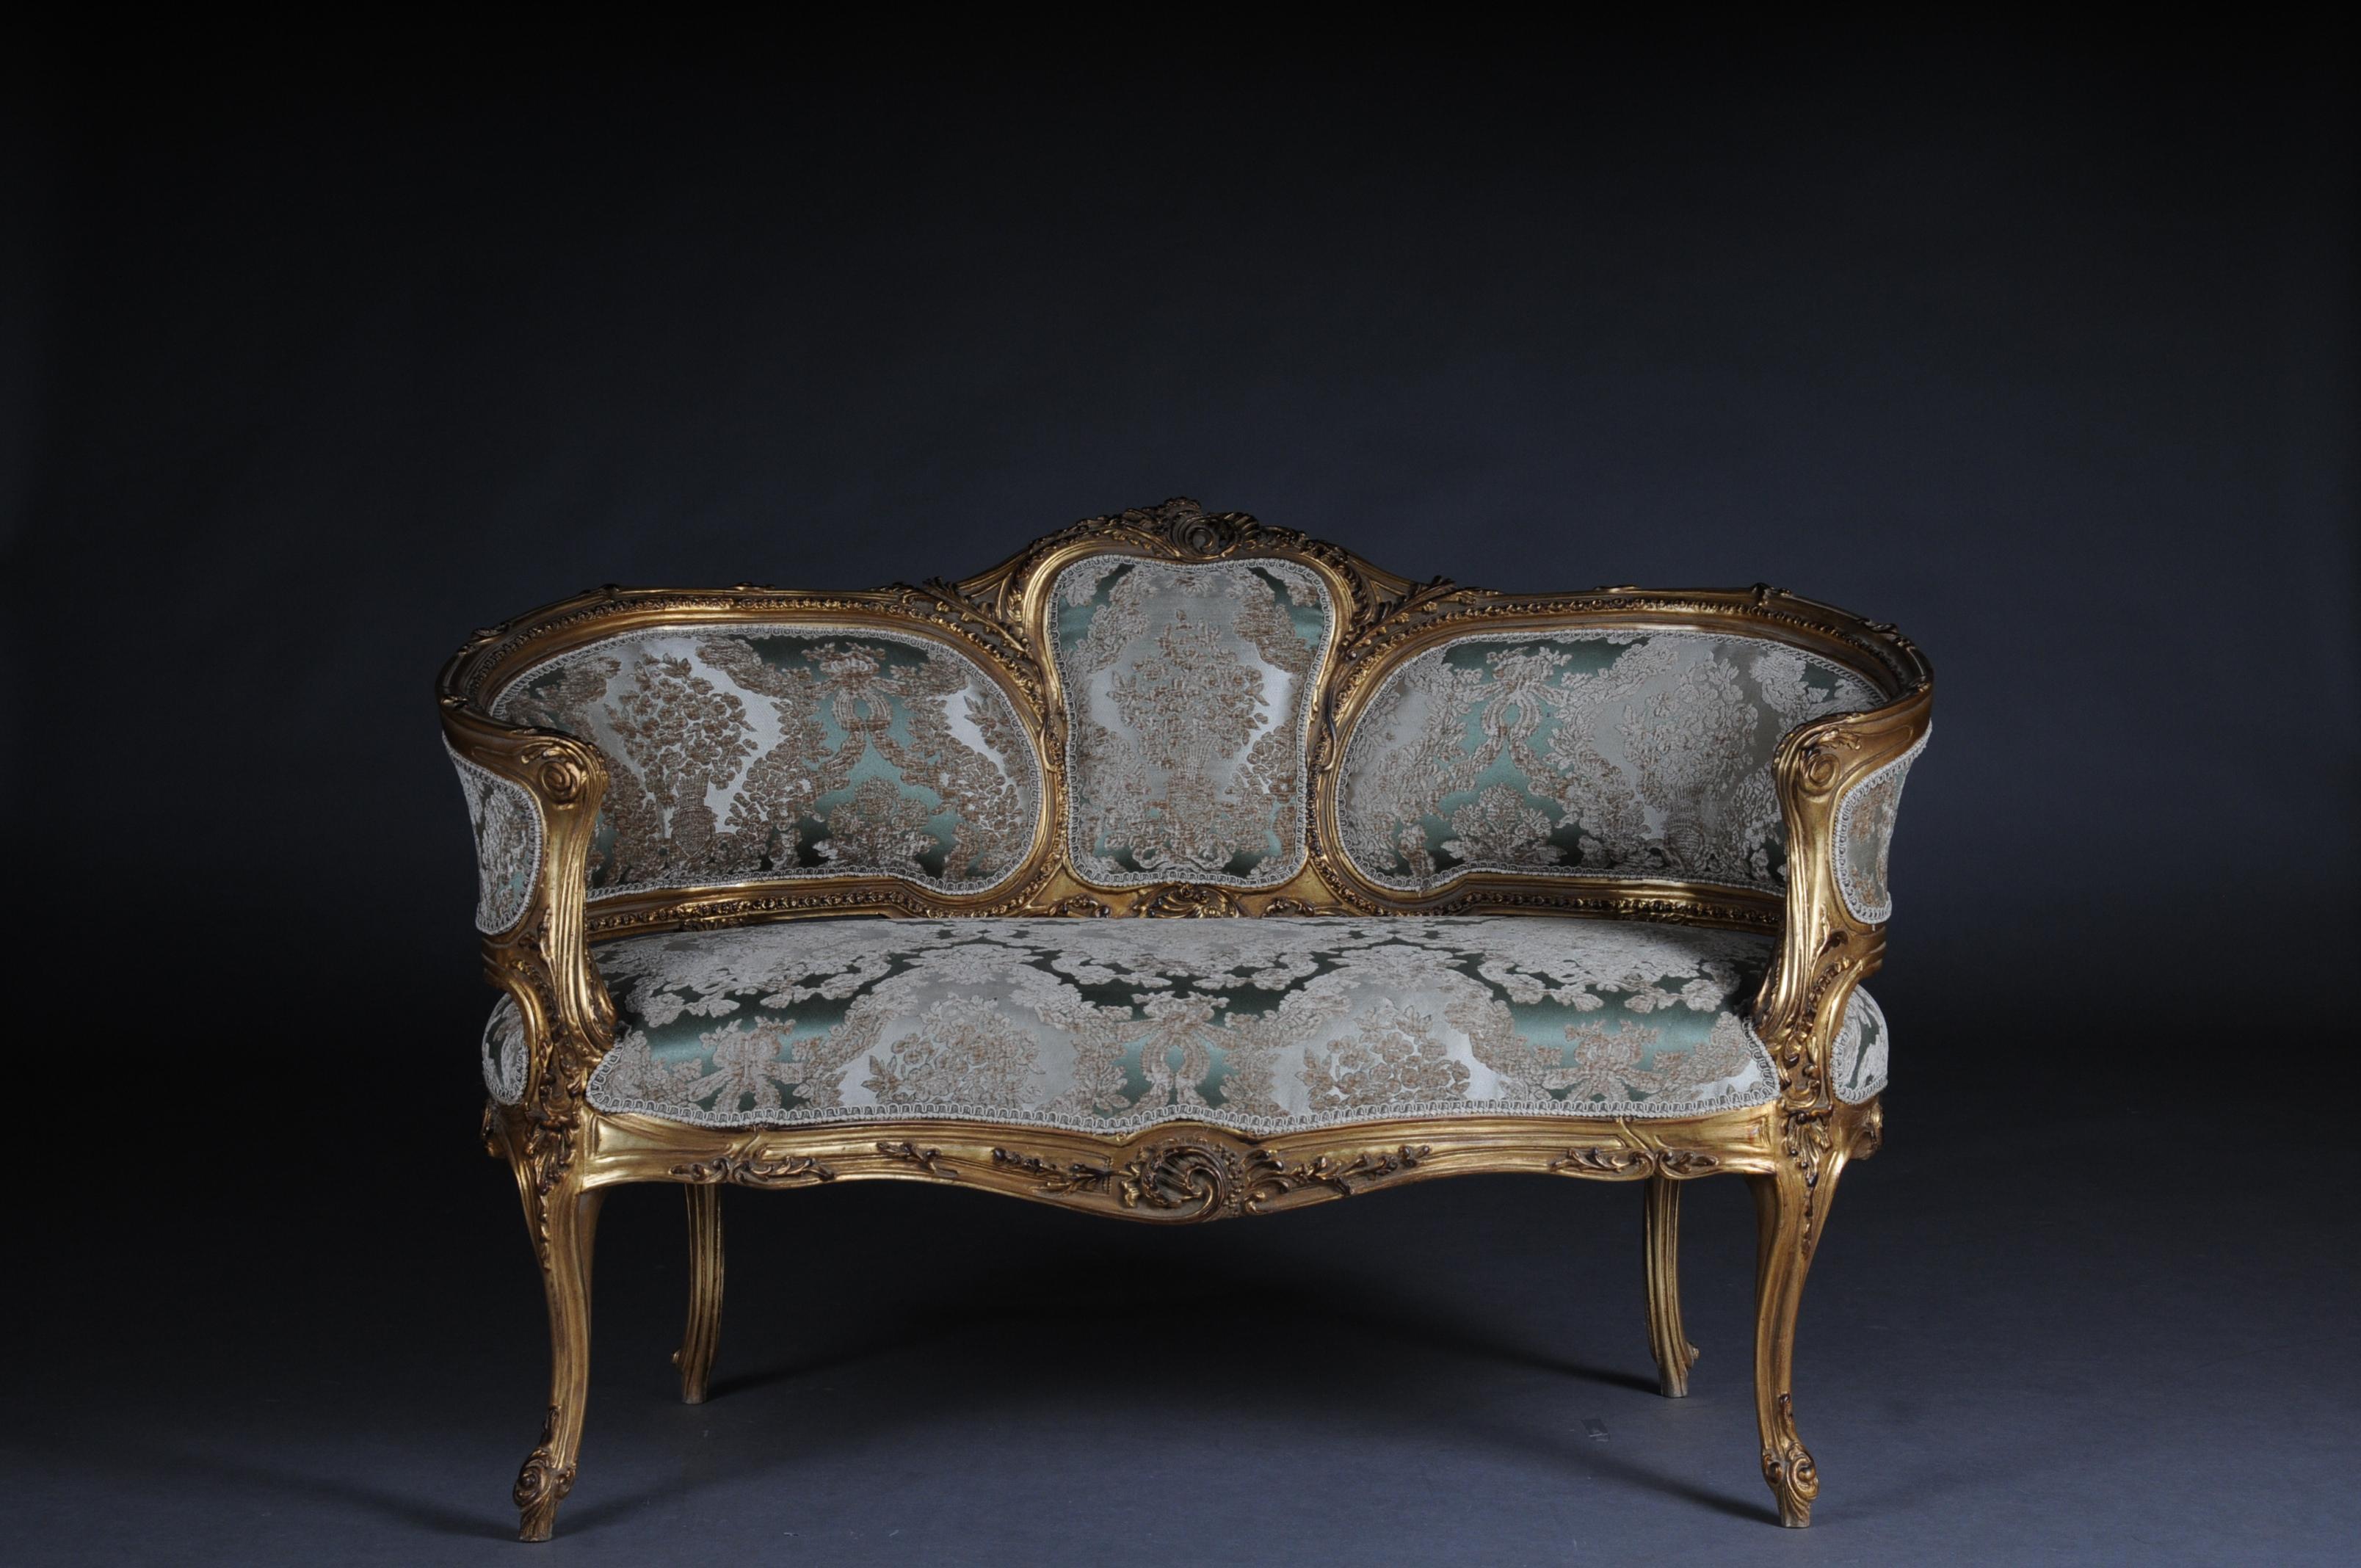 Solid beech wood, carved and gilded. Rising backrest framing with openwork rocaille crowning. Appropriately curved frame with richly carved foliage. Slightly curved frame on straight legs. Seat and backrest are finished with a historical, classic